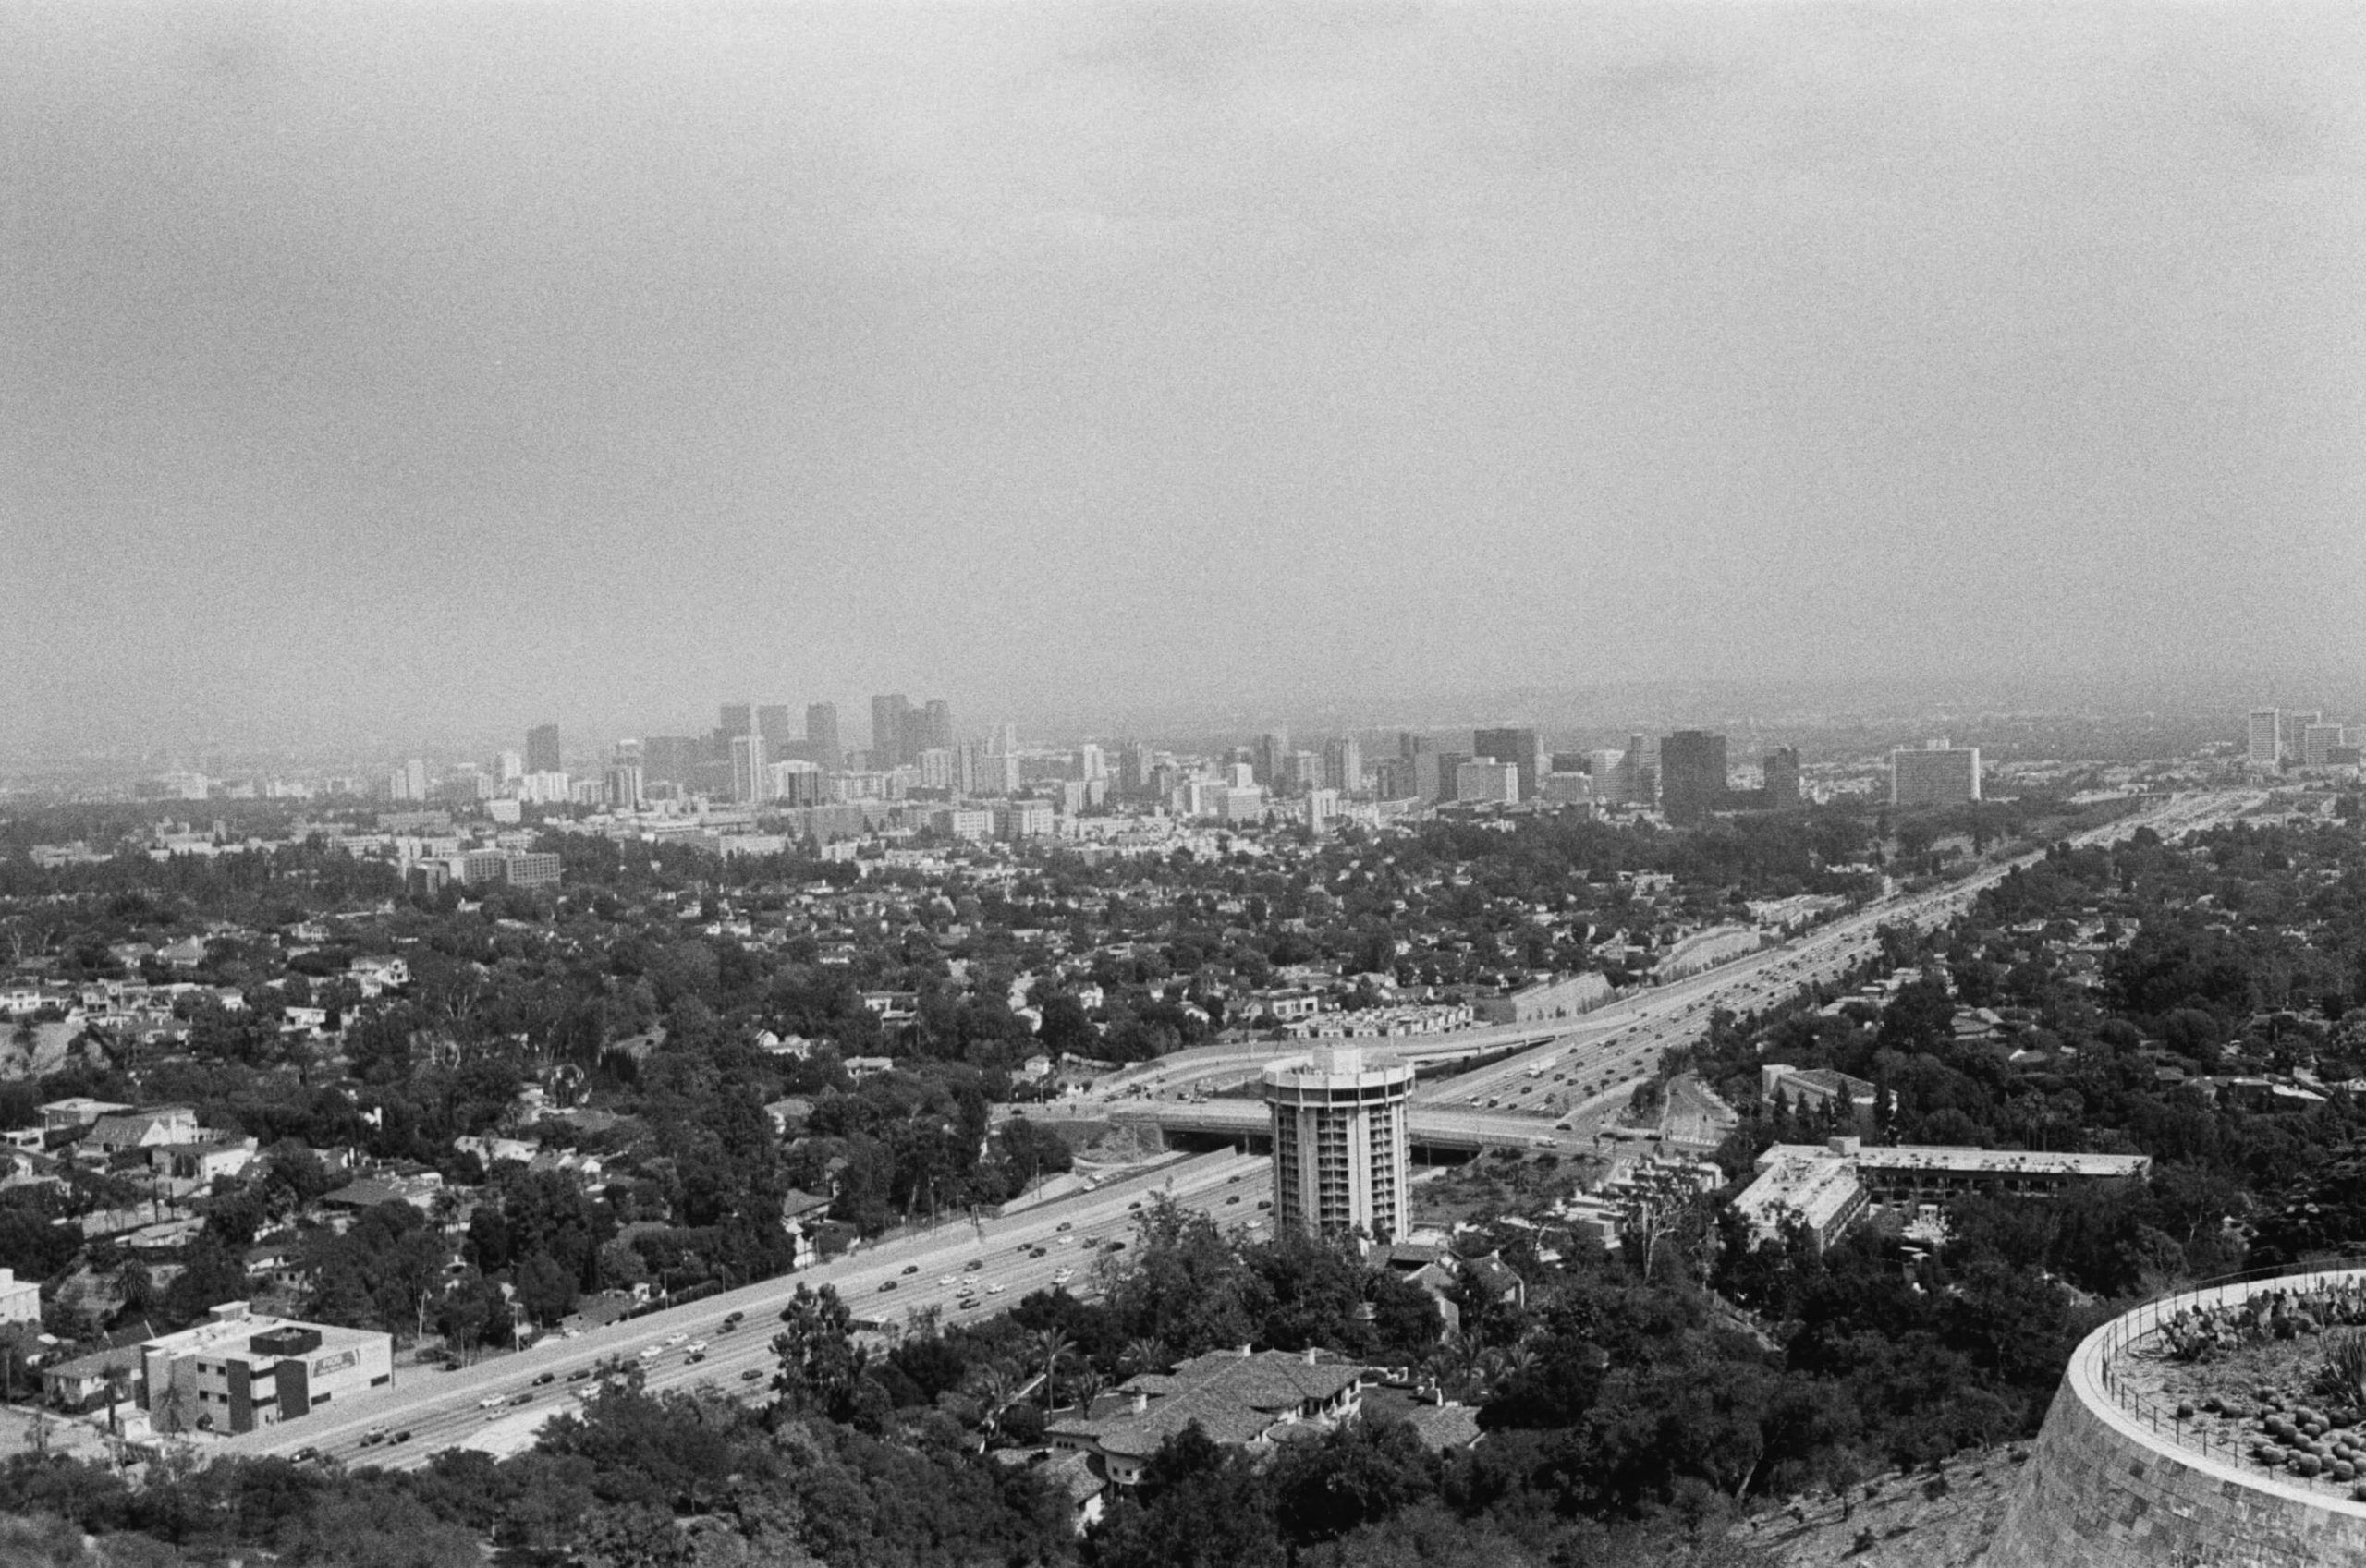 rollei 35 sample photo on ilford hp5 film. bird's eye view of los angeles from the getty museum.